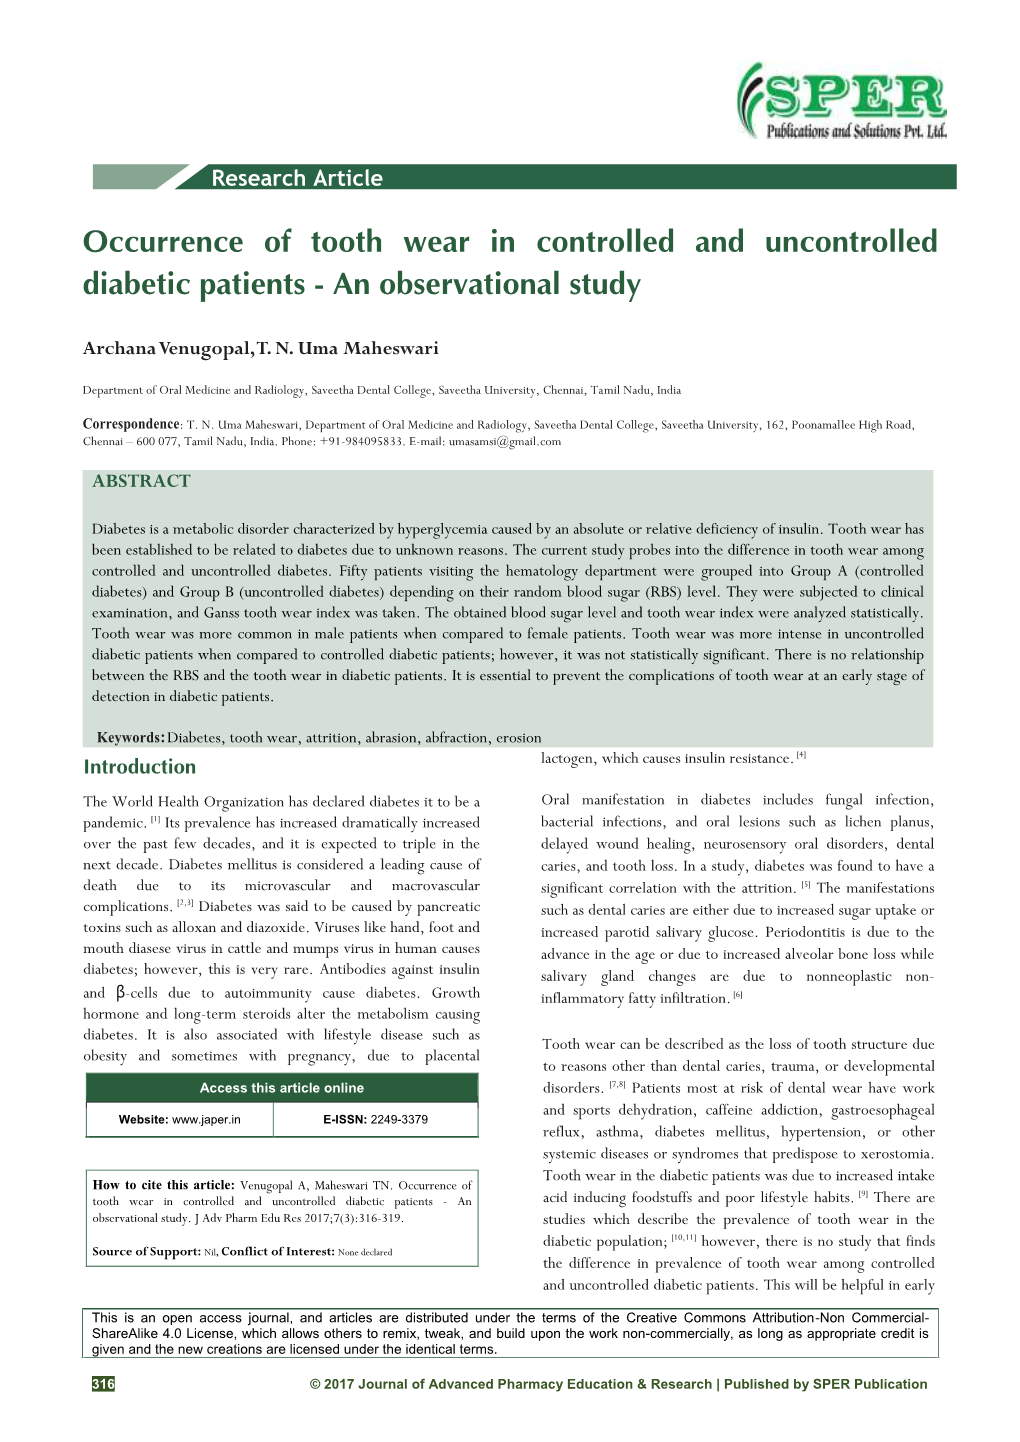 Occurrence of Tooth Wear in Controlled and Uncontrolled Diabetic Patients - an Observational Study